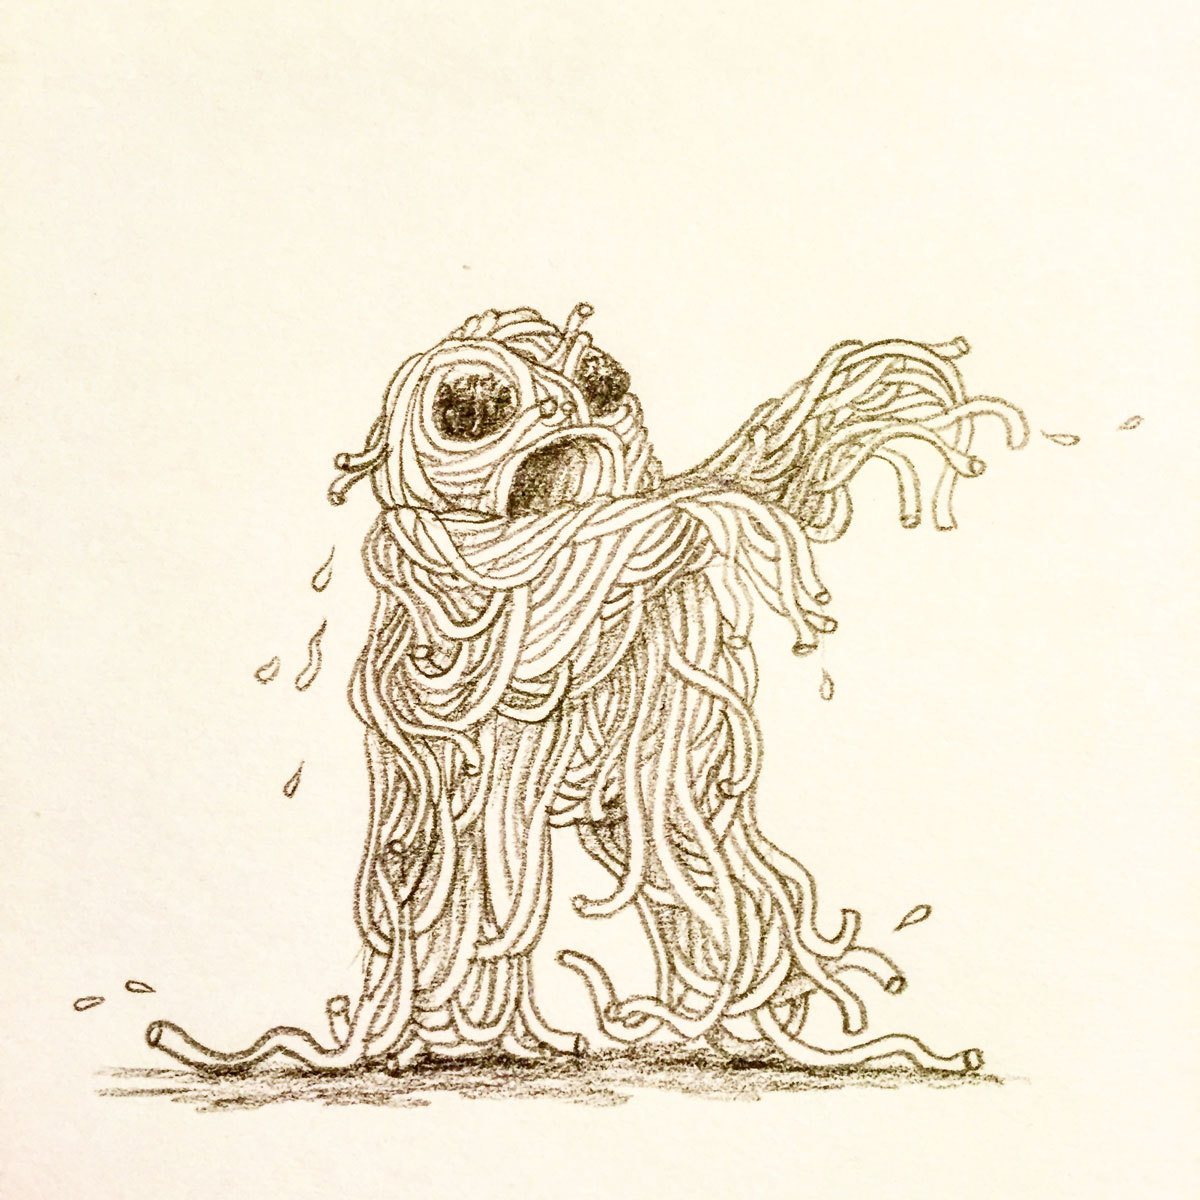 “I’m always sketching during meetings,” says Huyck. “It gives my restless hands something to do. Here, I started by drawing noodles, and when they started to take the shape of a figure, I added the meatballs for eyes and it became Spaghyeti!”